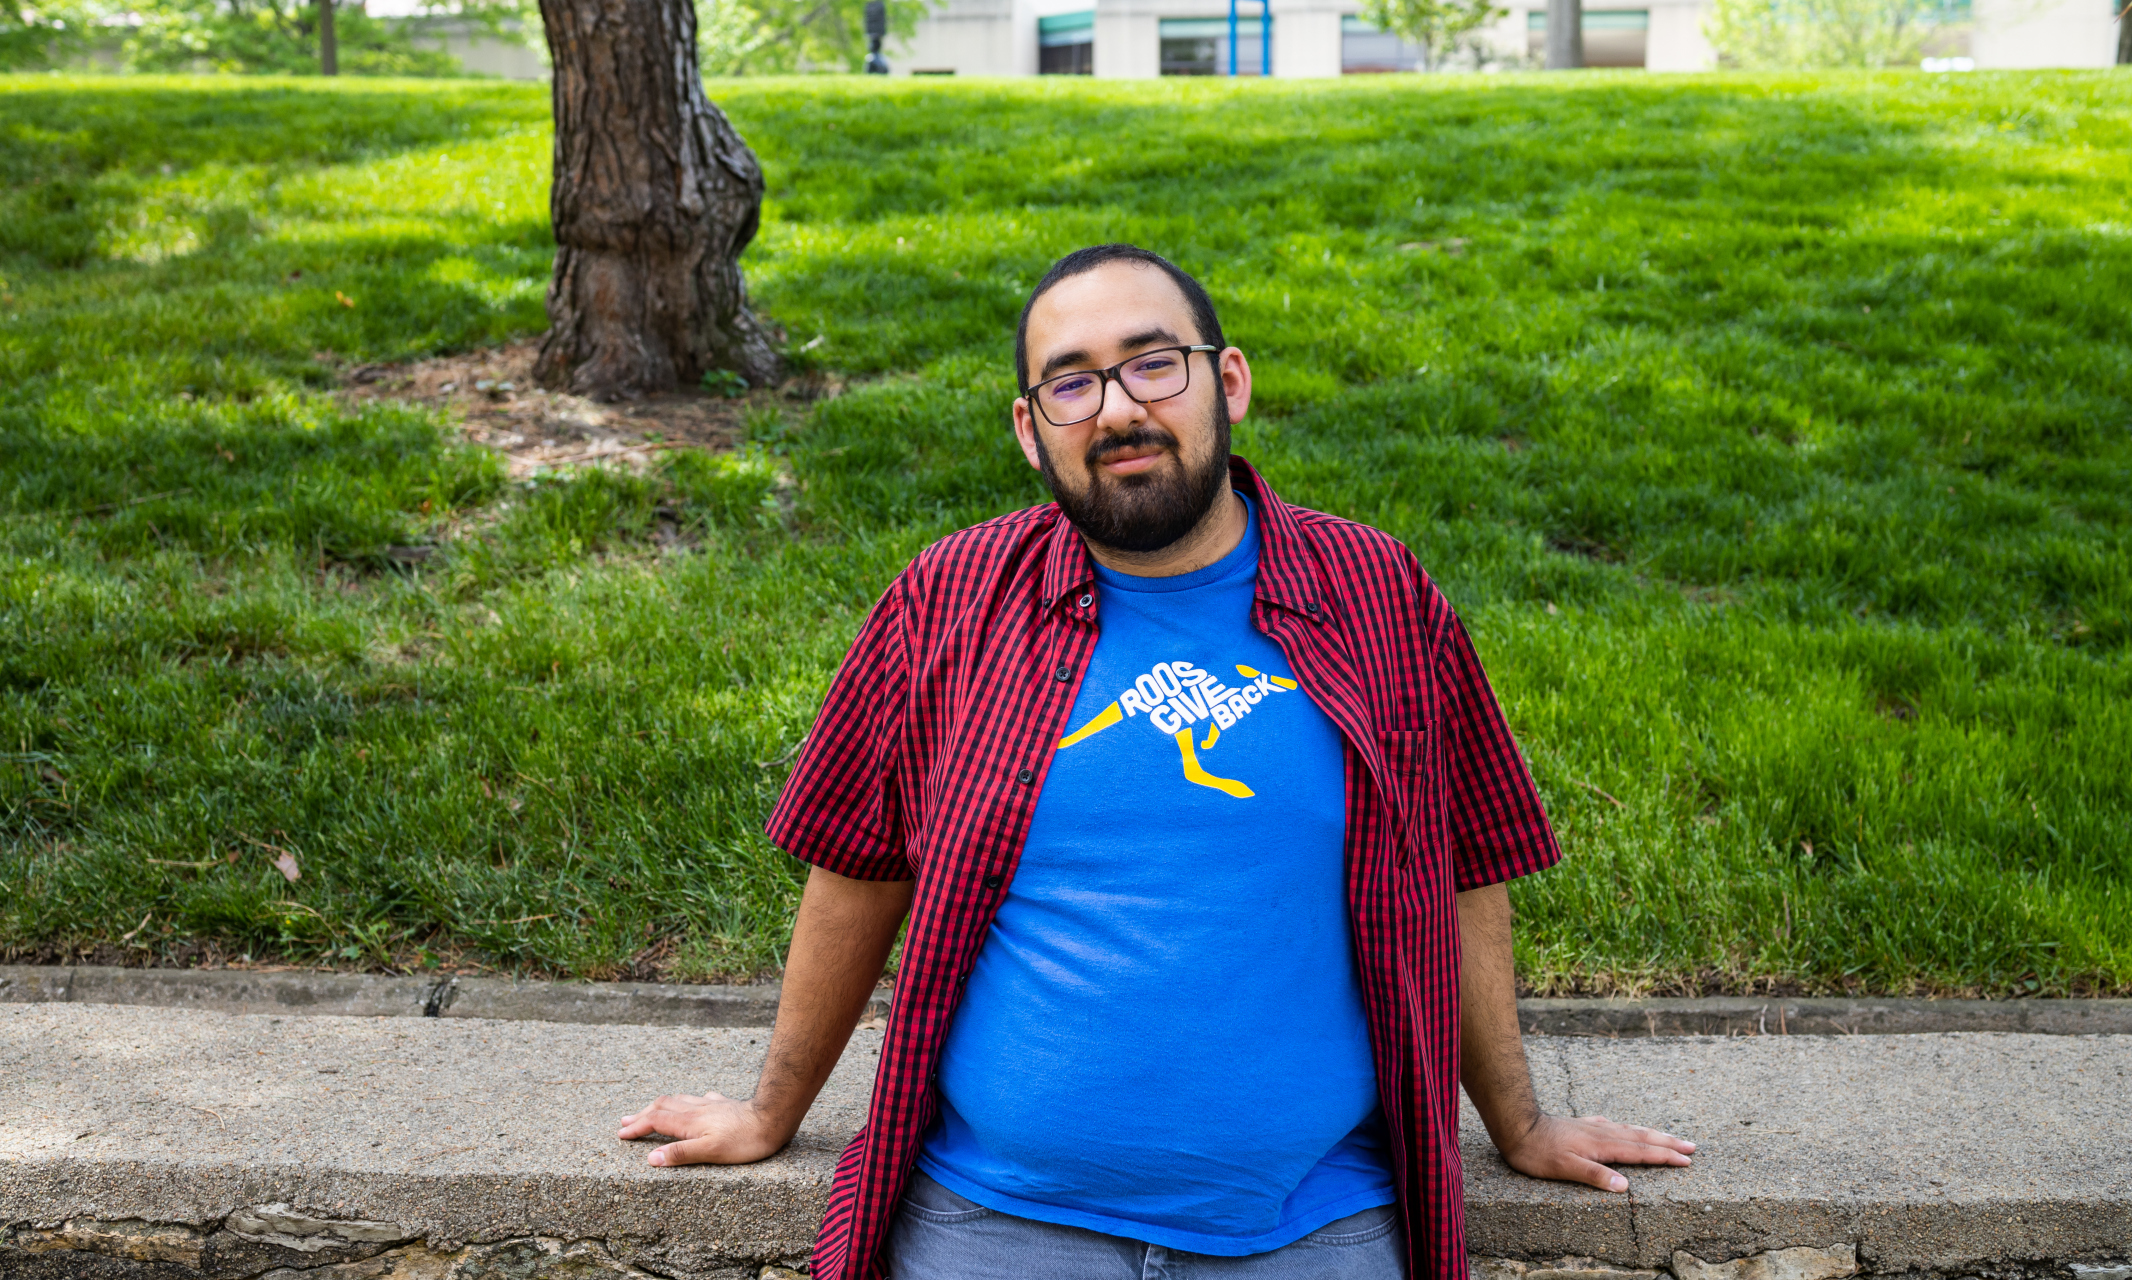 Researcher Alejandro Cervantes, dressed casually in an outdoor campus setting